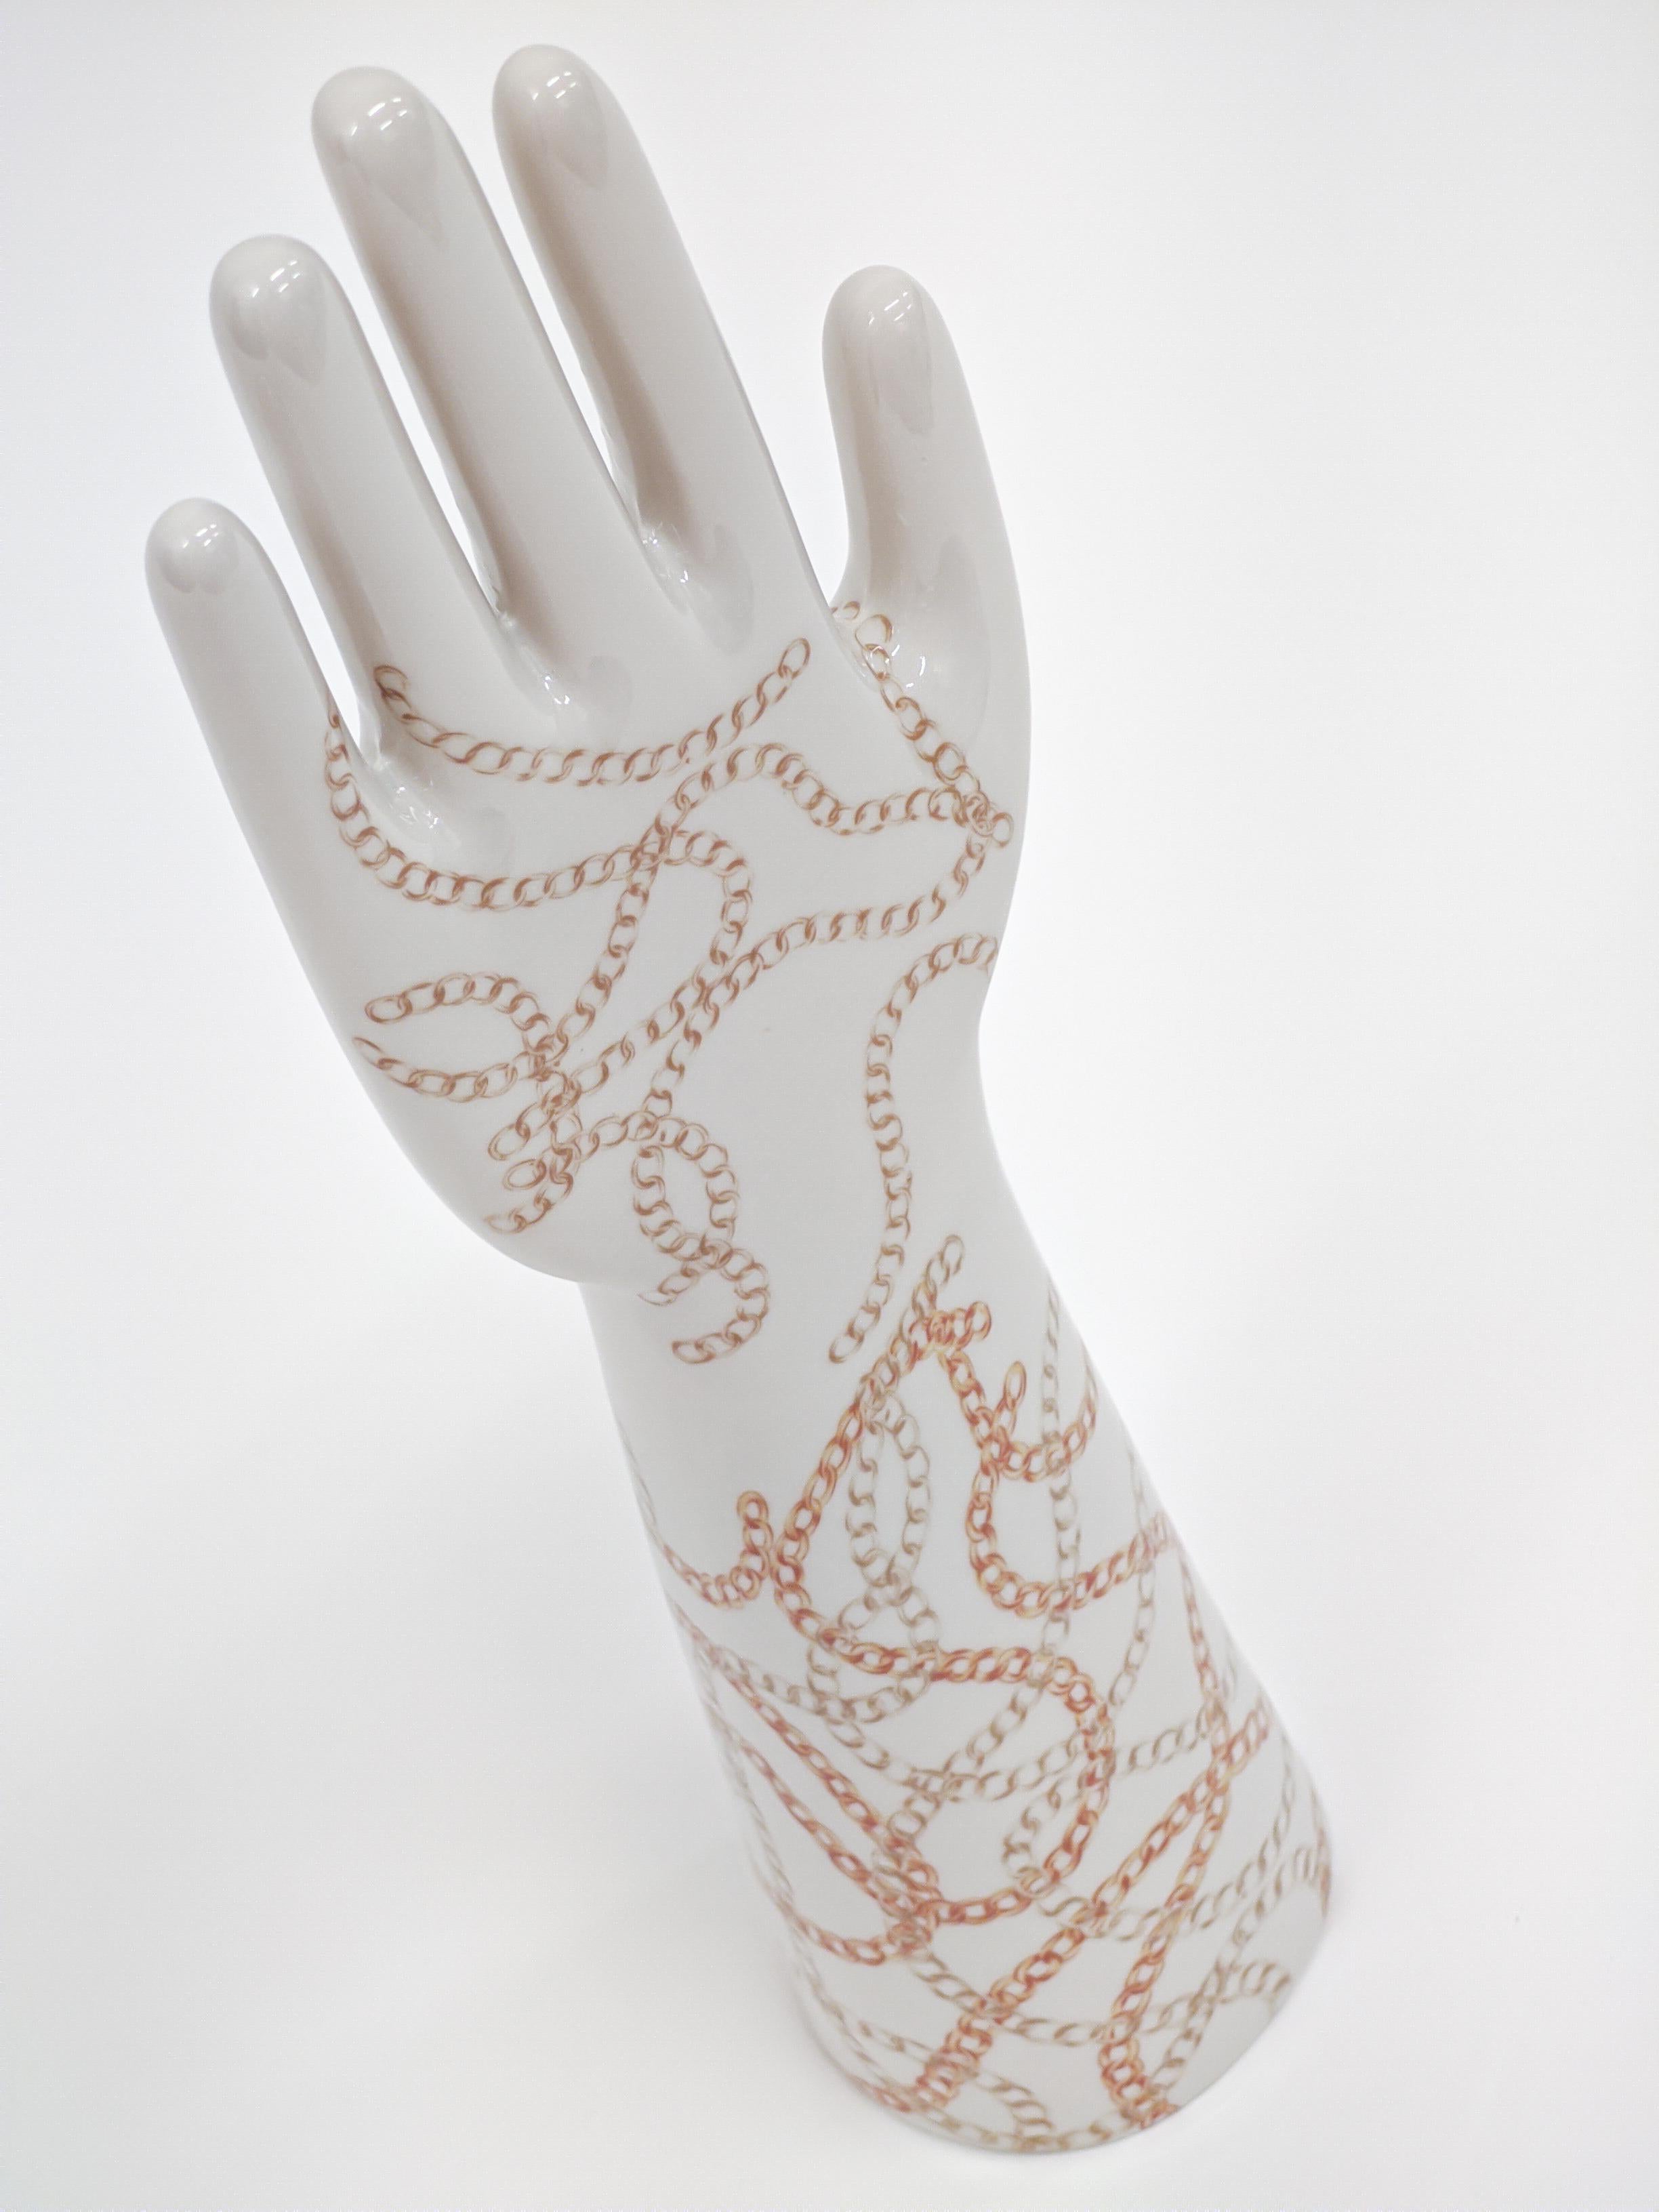 Molded Anatomica, Porcelain Hand with chains Decoration by Vito Nesta For Sale